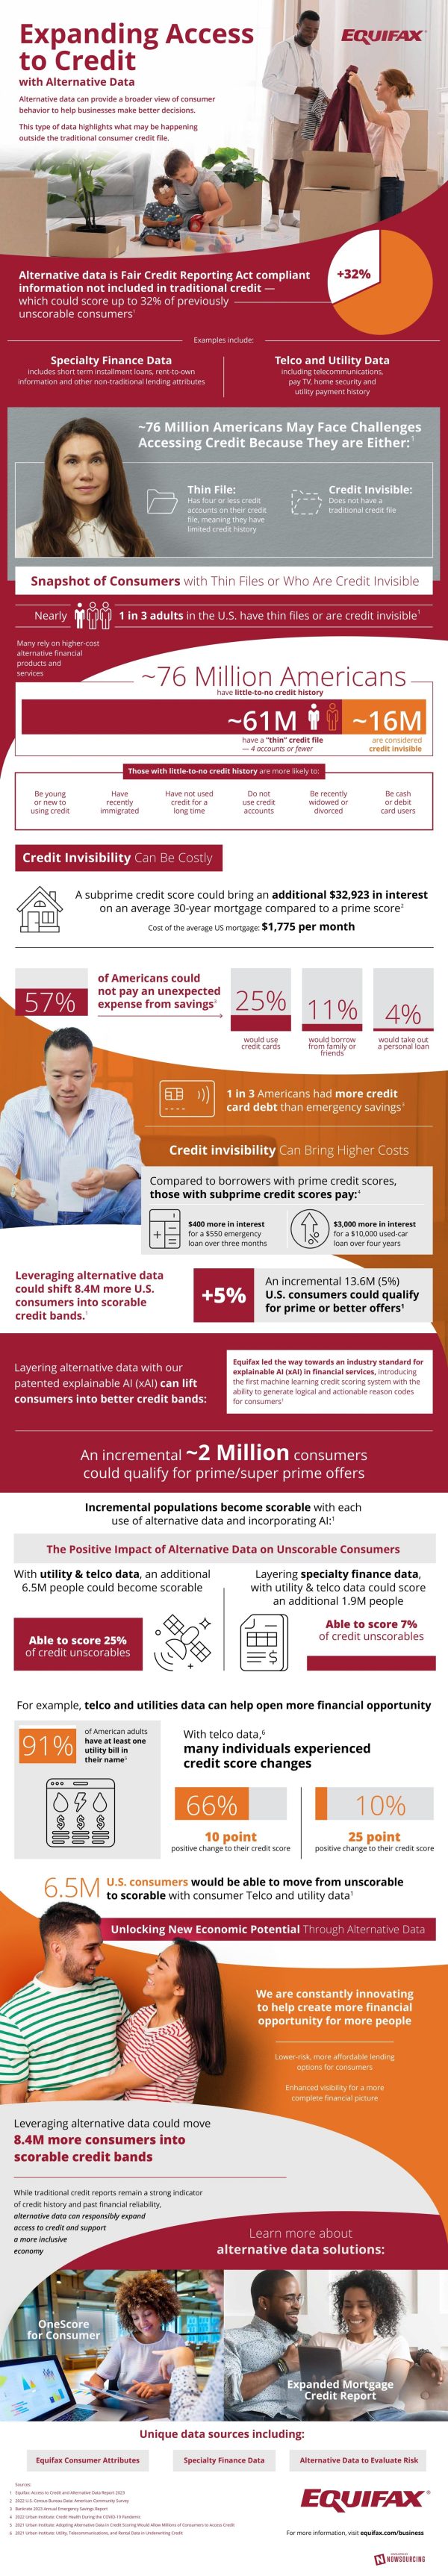 Infographic on improving credit access using alternative data.